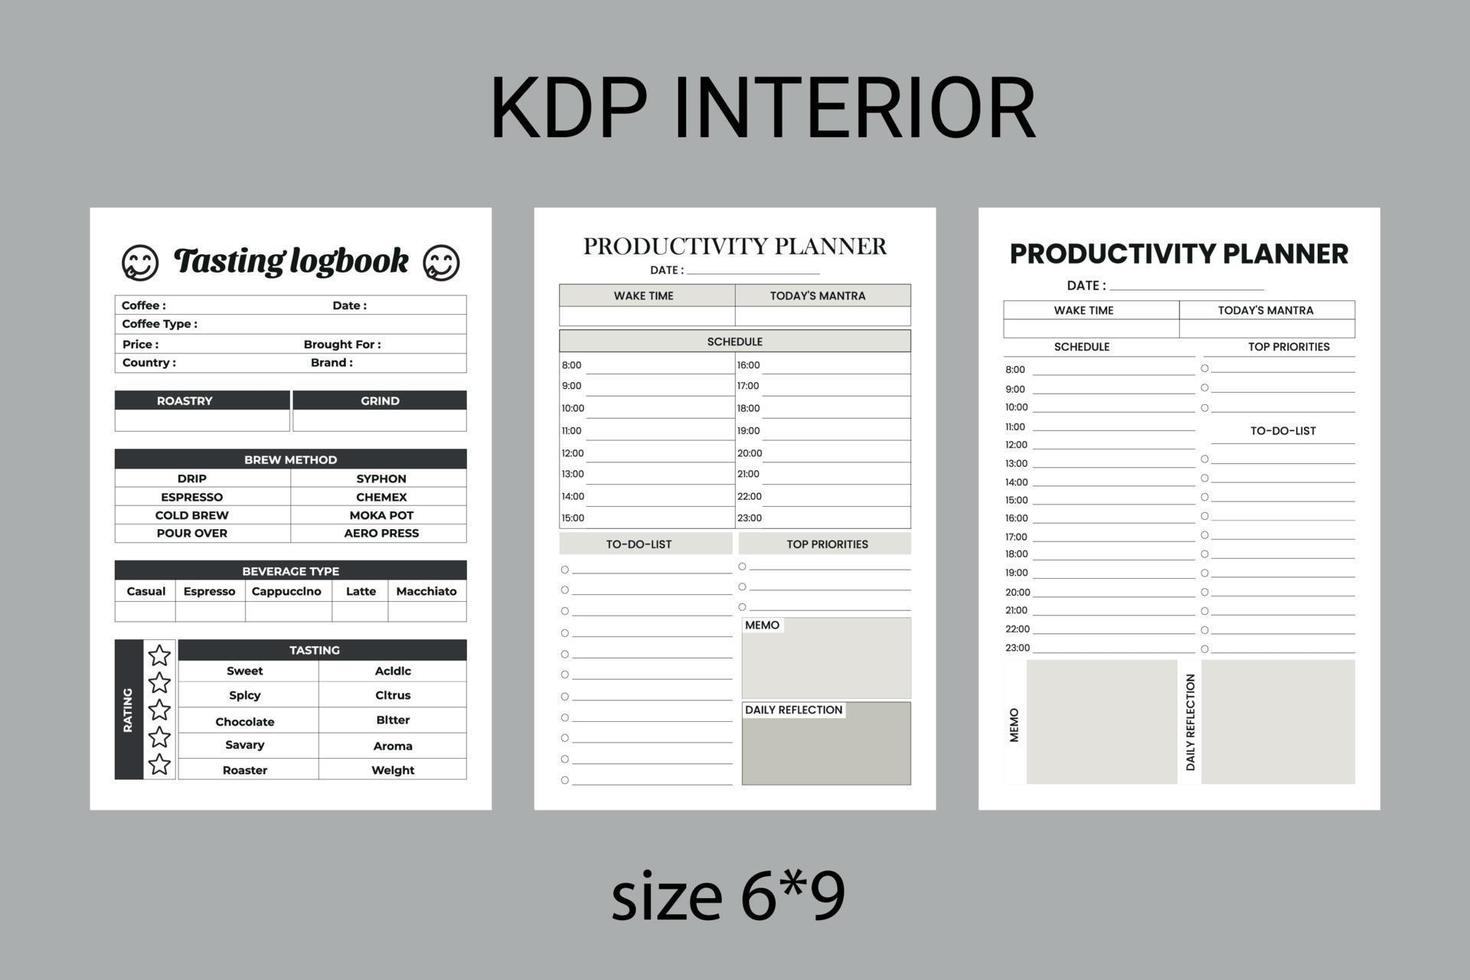 coffey testing and productivity log book kdp interior template. coffey testing Planner Design vector